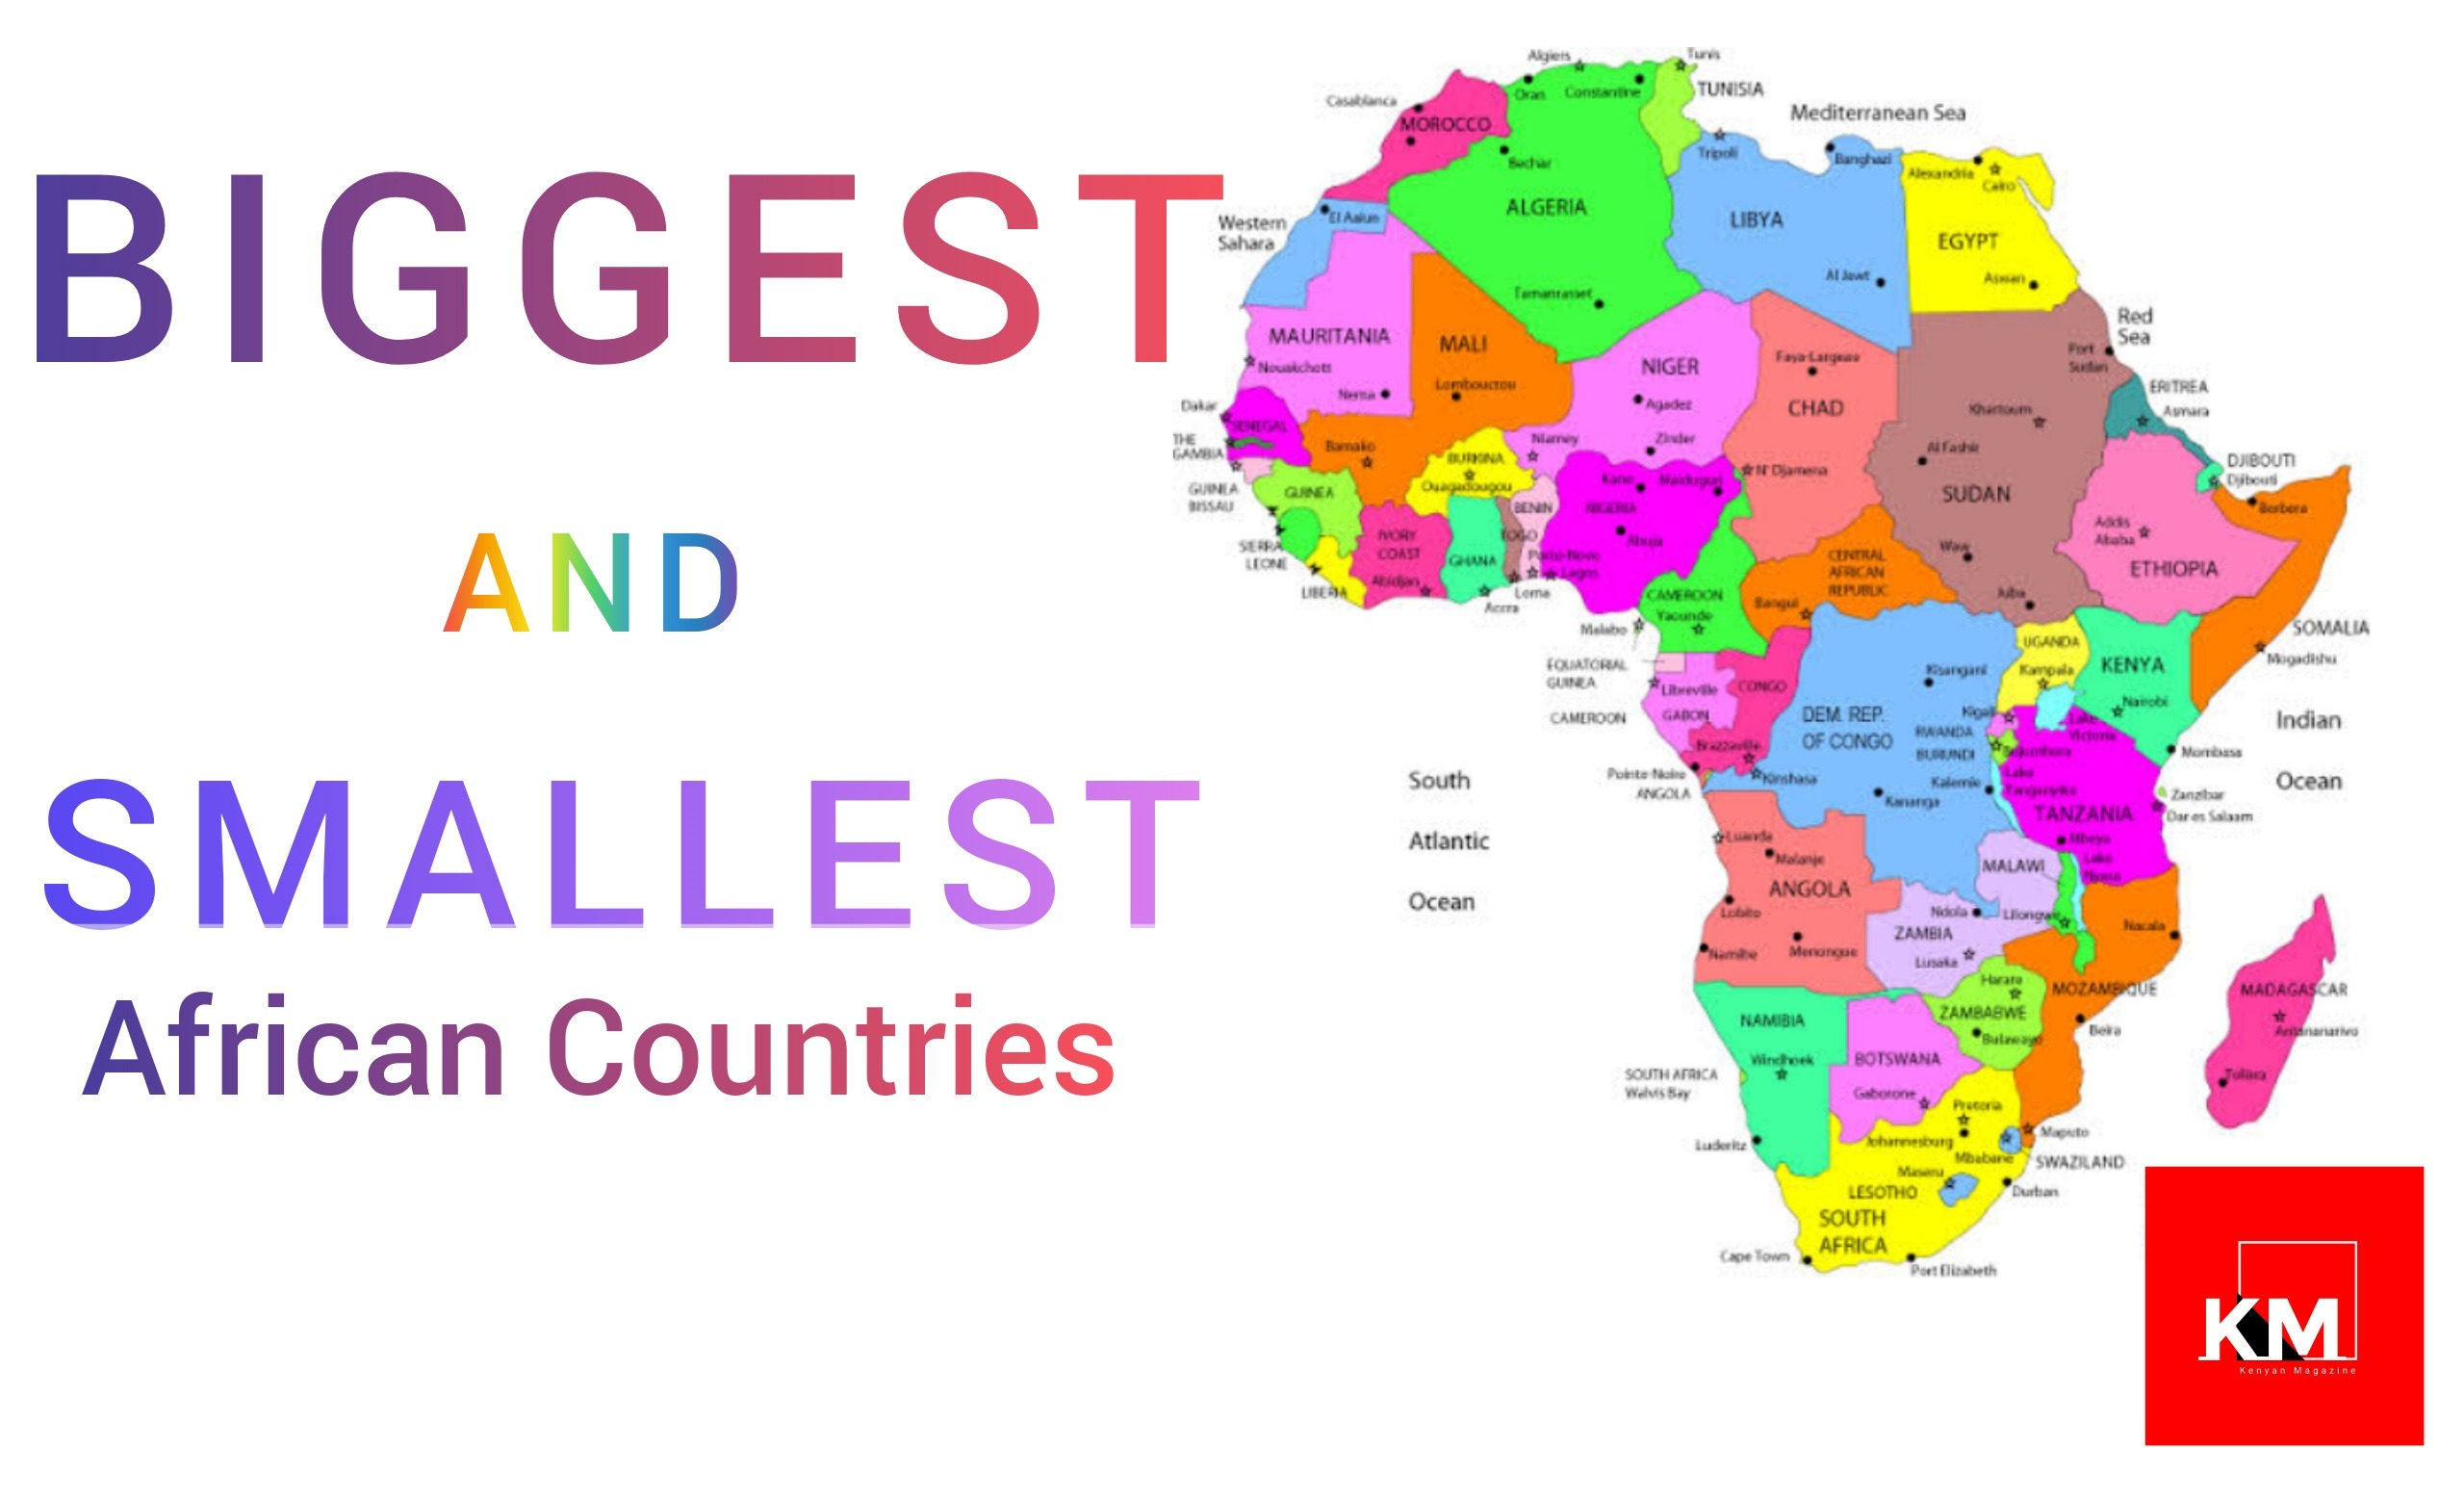 Biggest and smallest African countries